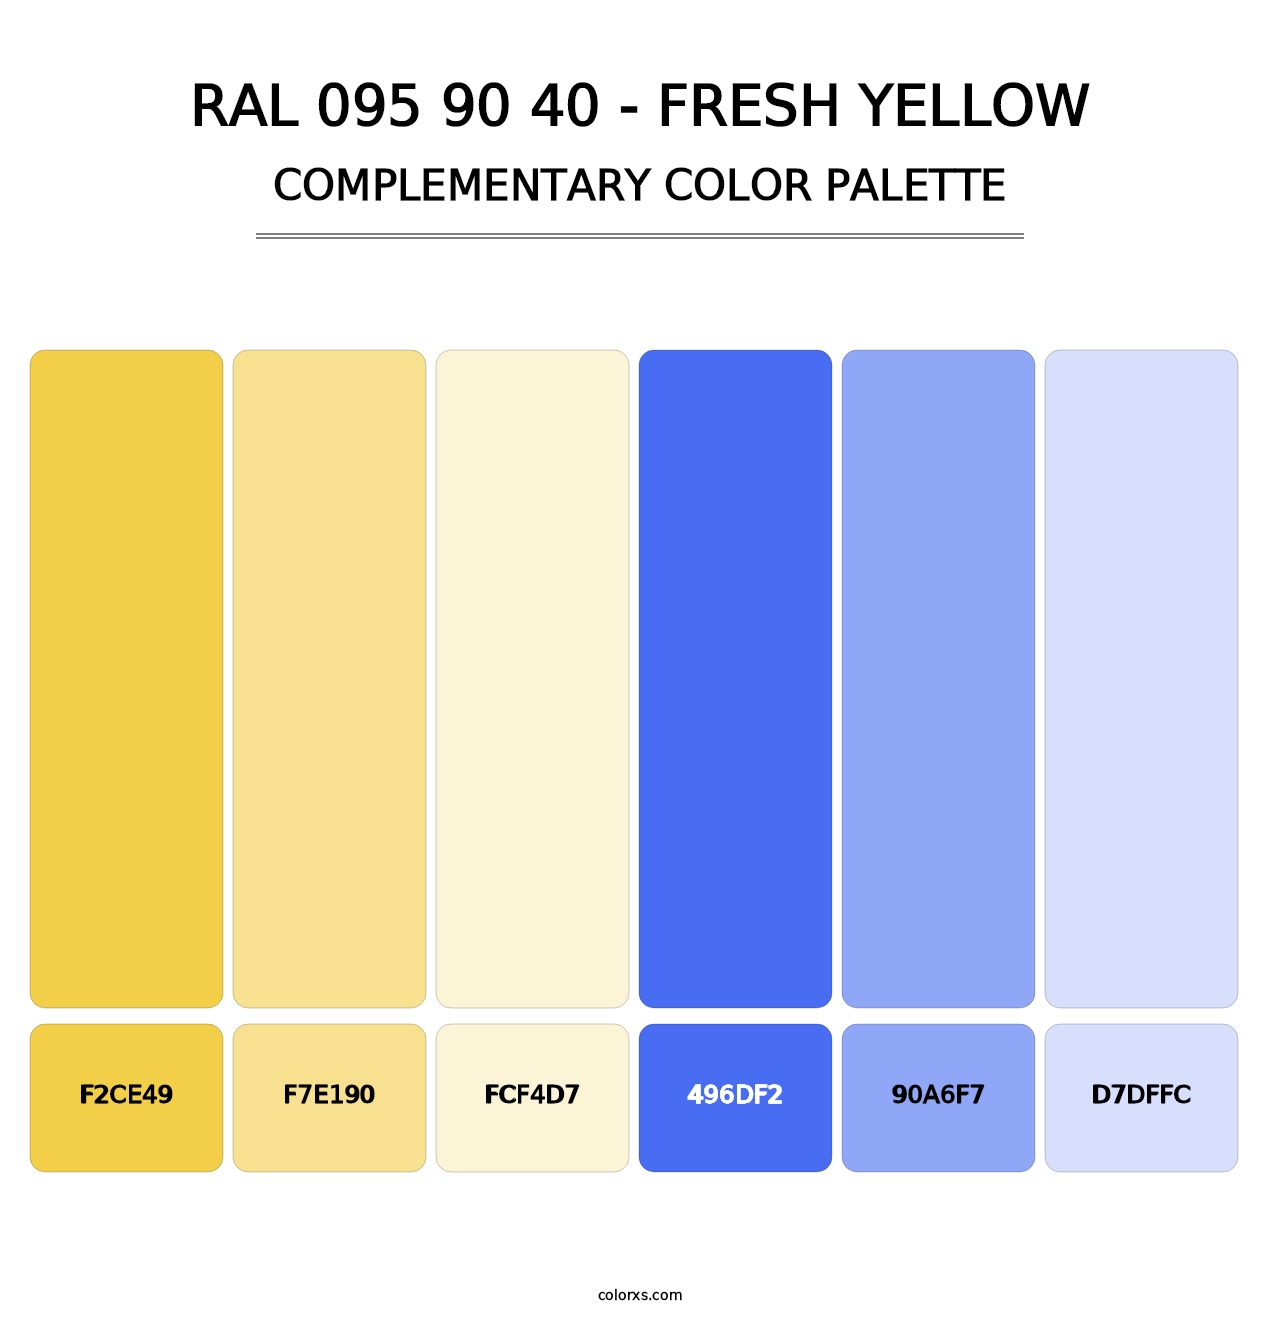 RAL 095 90 40 - Fresh Yellow - Complementary Color Palette